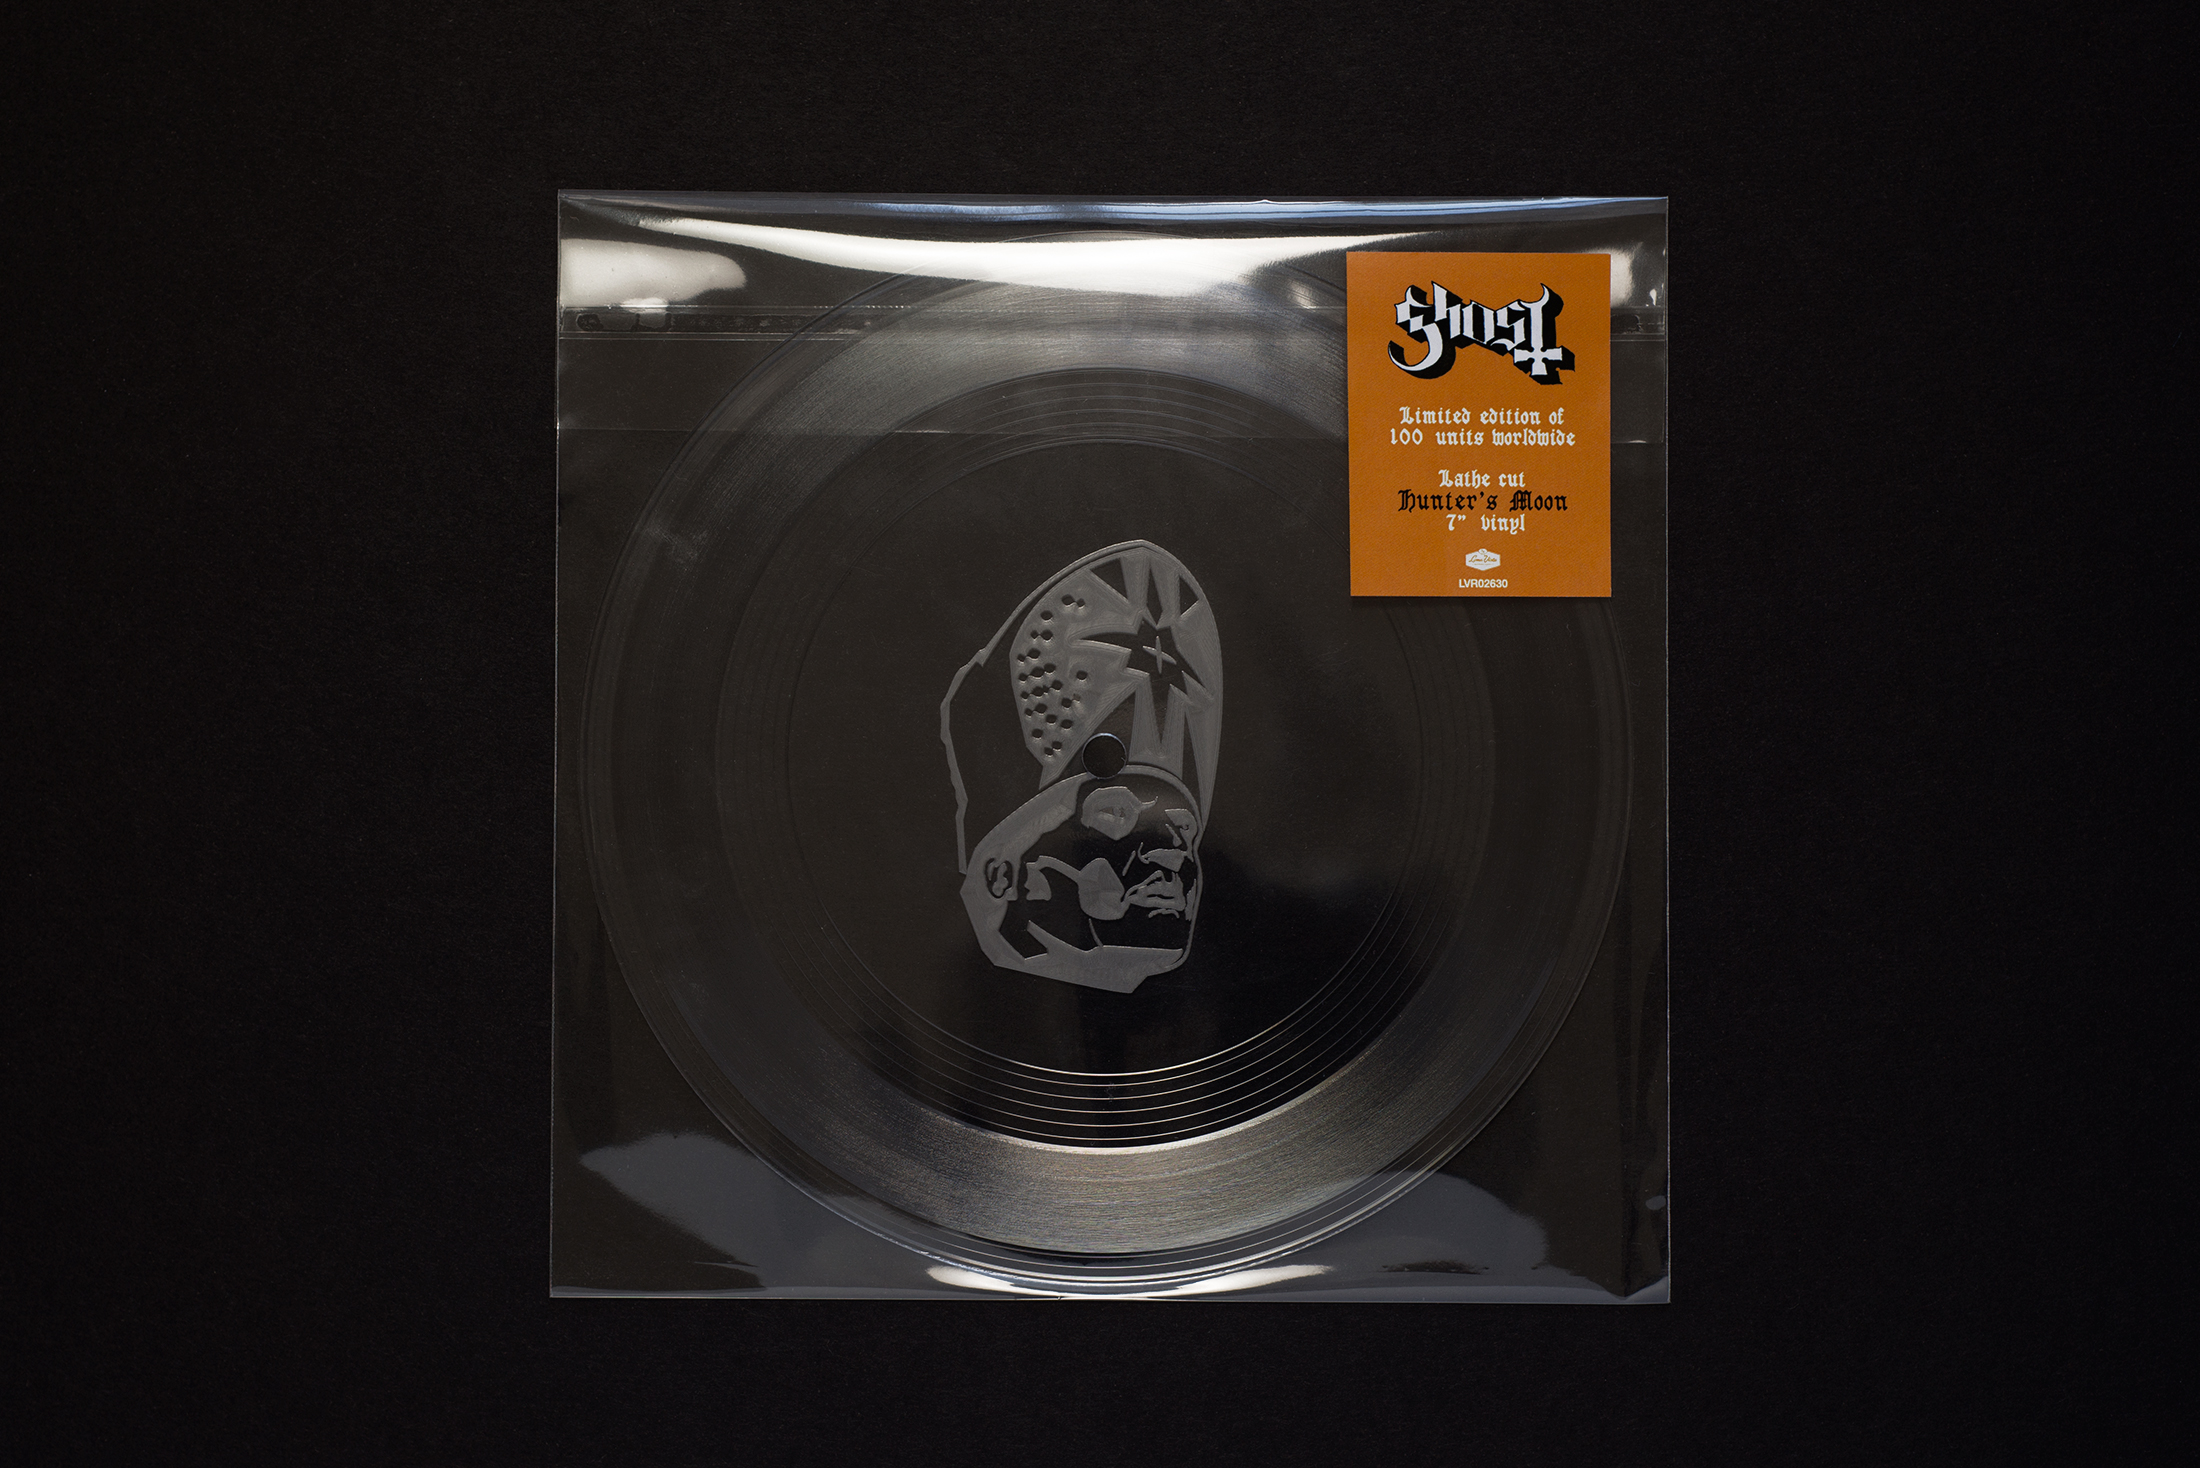 Ghost 7" // Client: Loma Vista Recordings